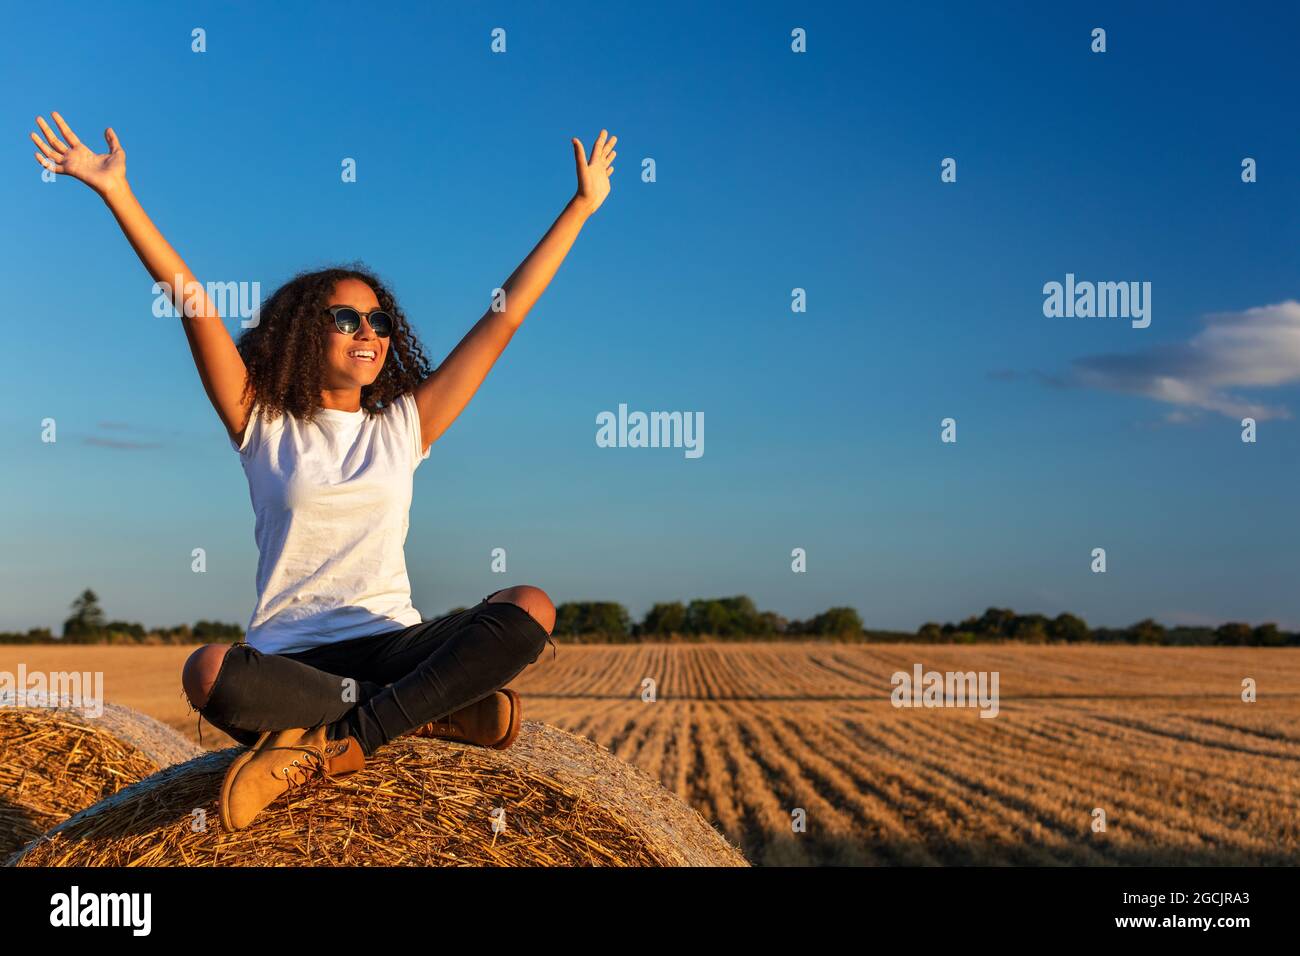 Beautiful, happy mixed race African American female girl child teenager young woman celebrating arms raised in sunshine wearing sunglasses and smiling Stock Photo